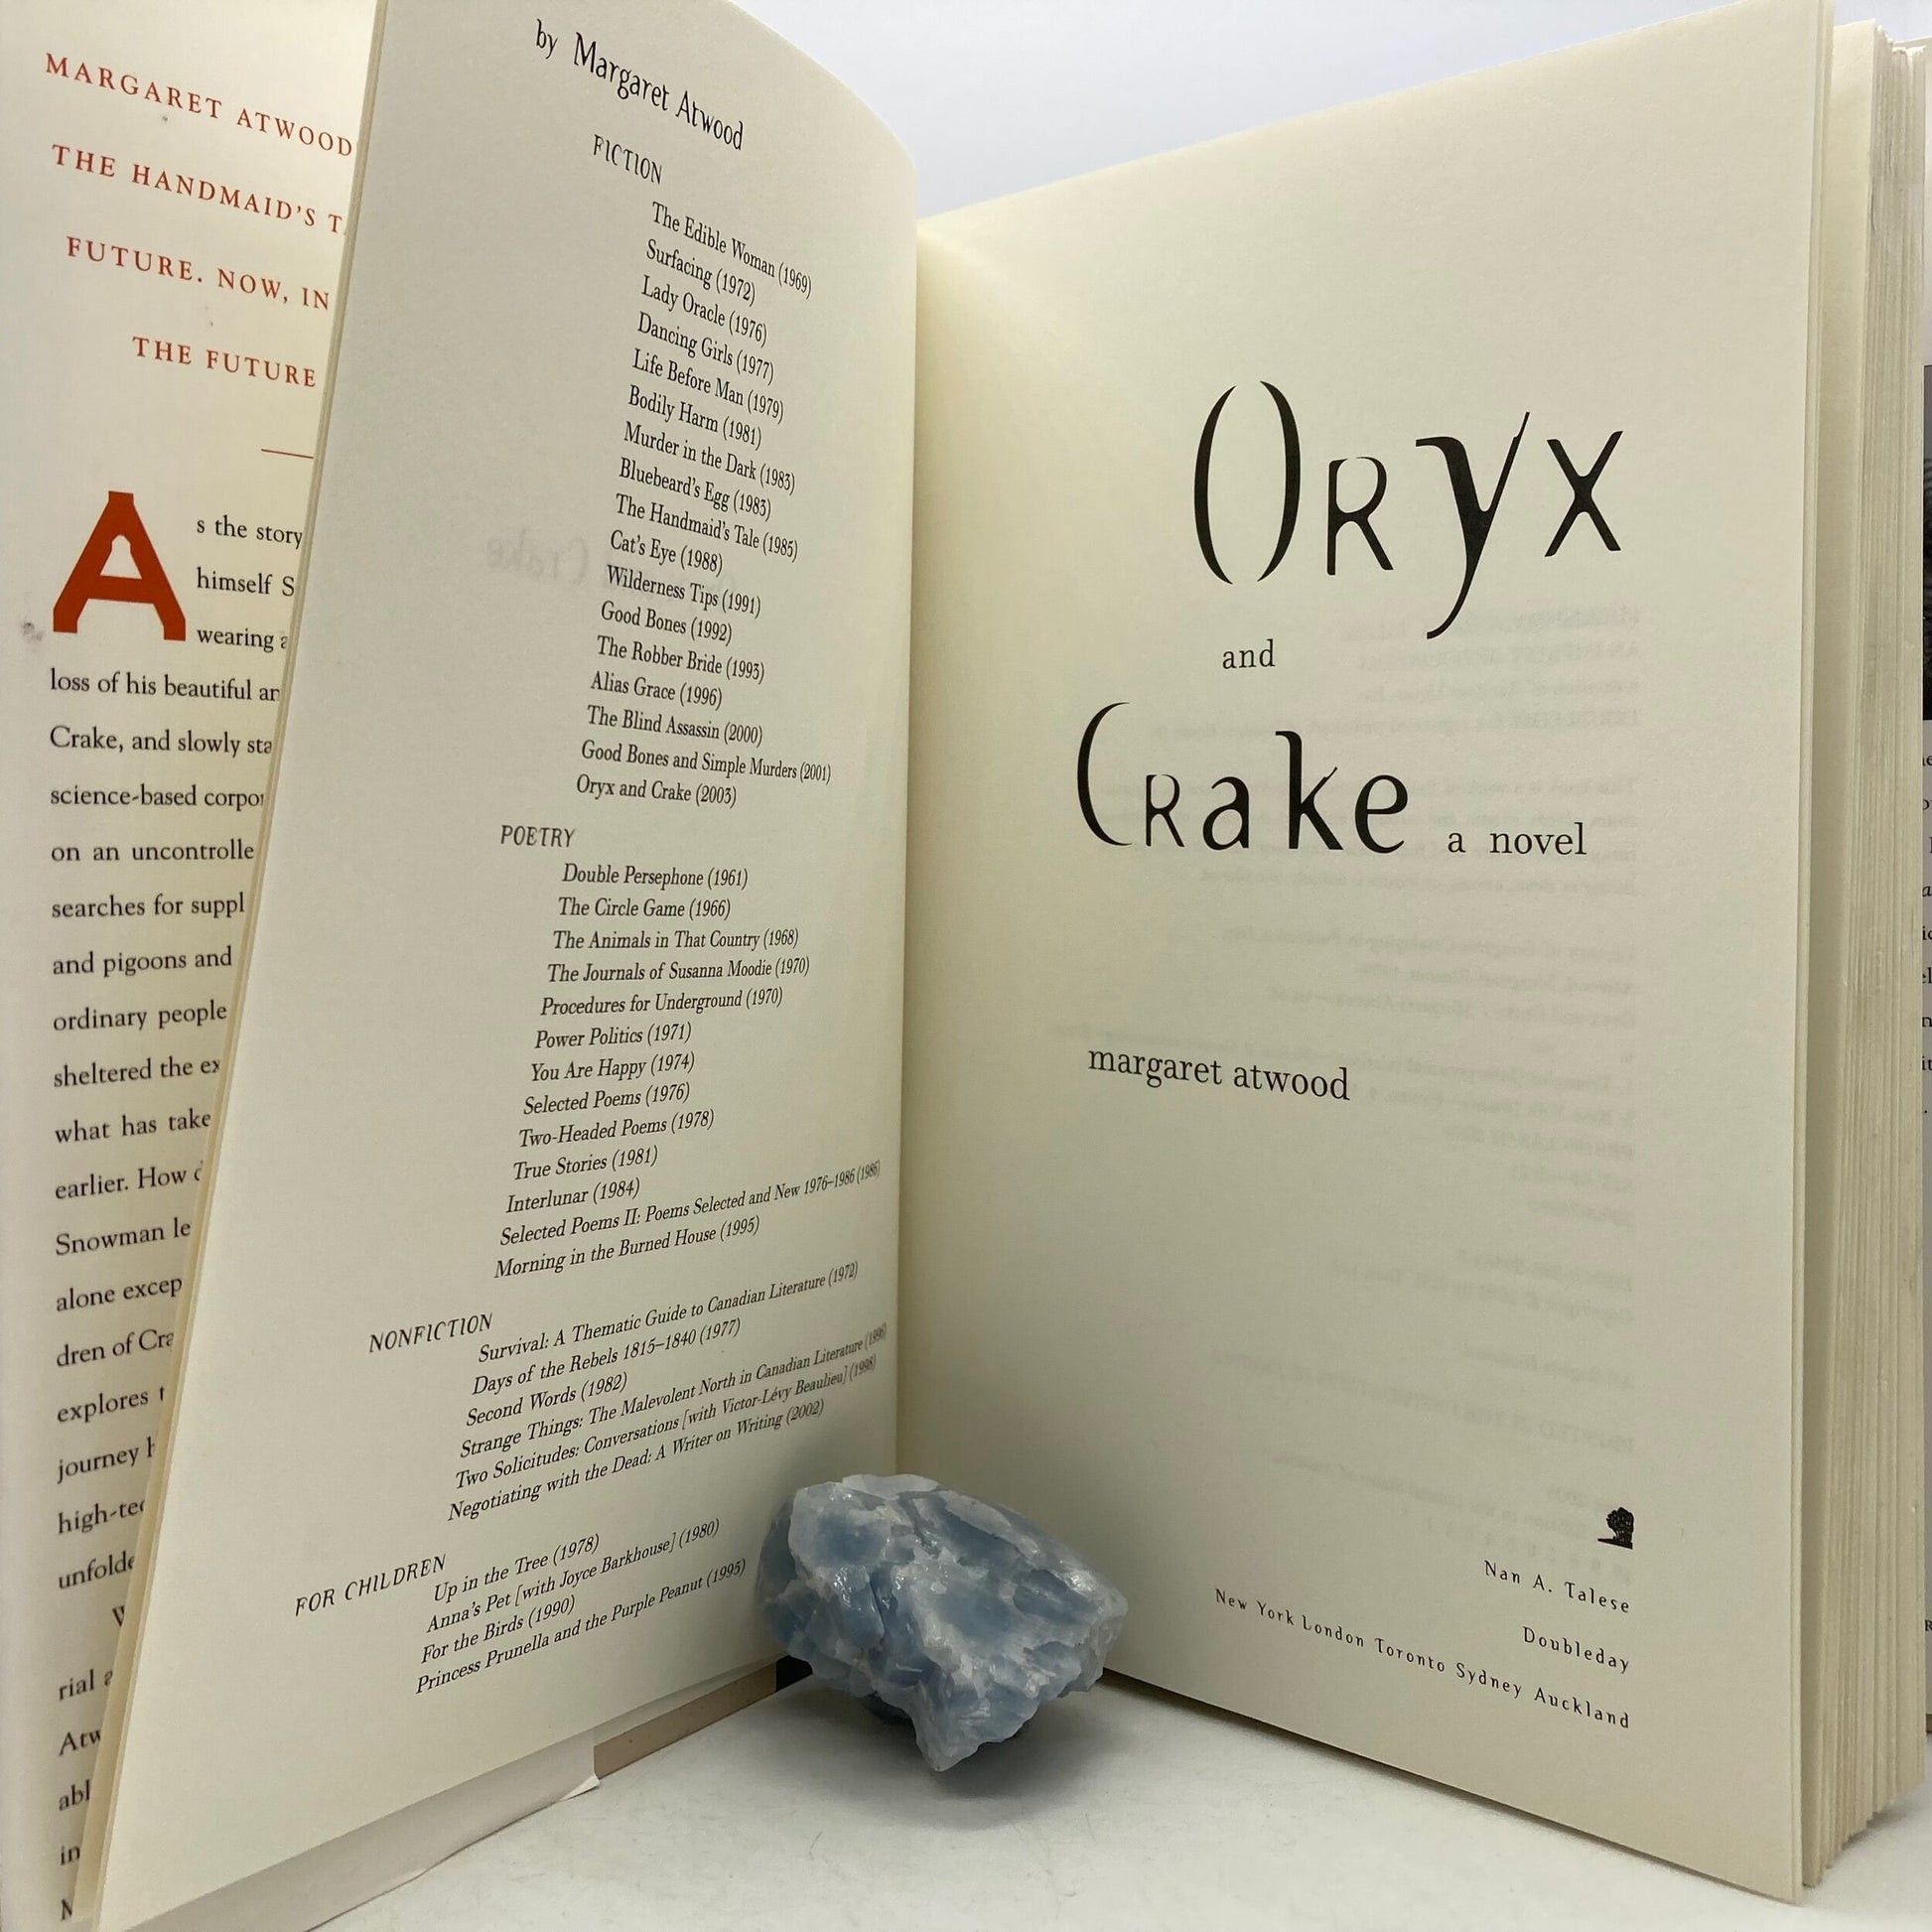 ATWOOD, Margaret "Oryx and Crake" [Doubleday, 2003] 1st Edition - Buzz Bookstore